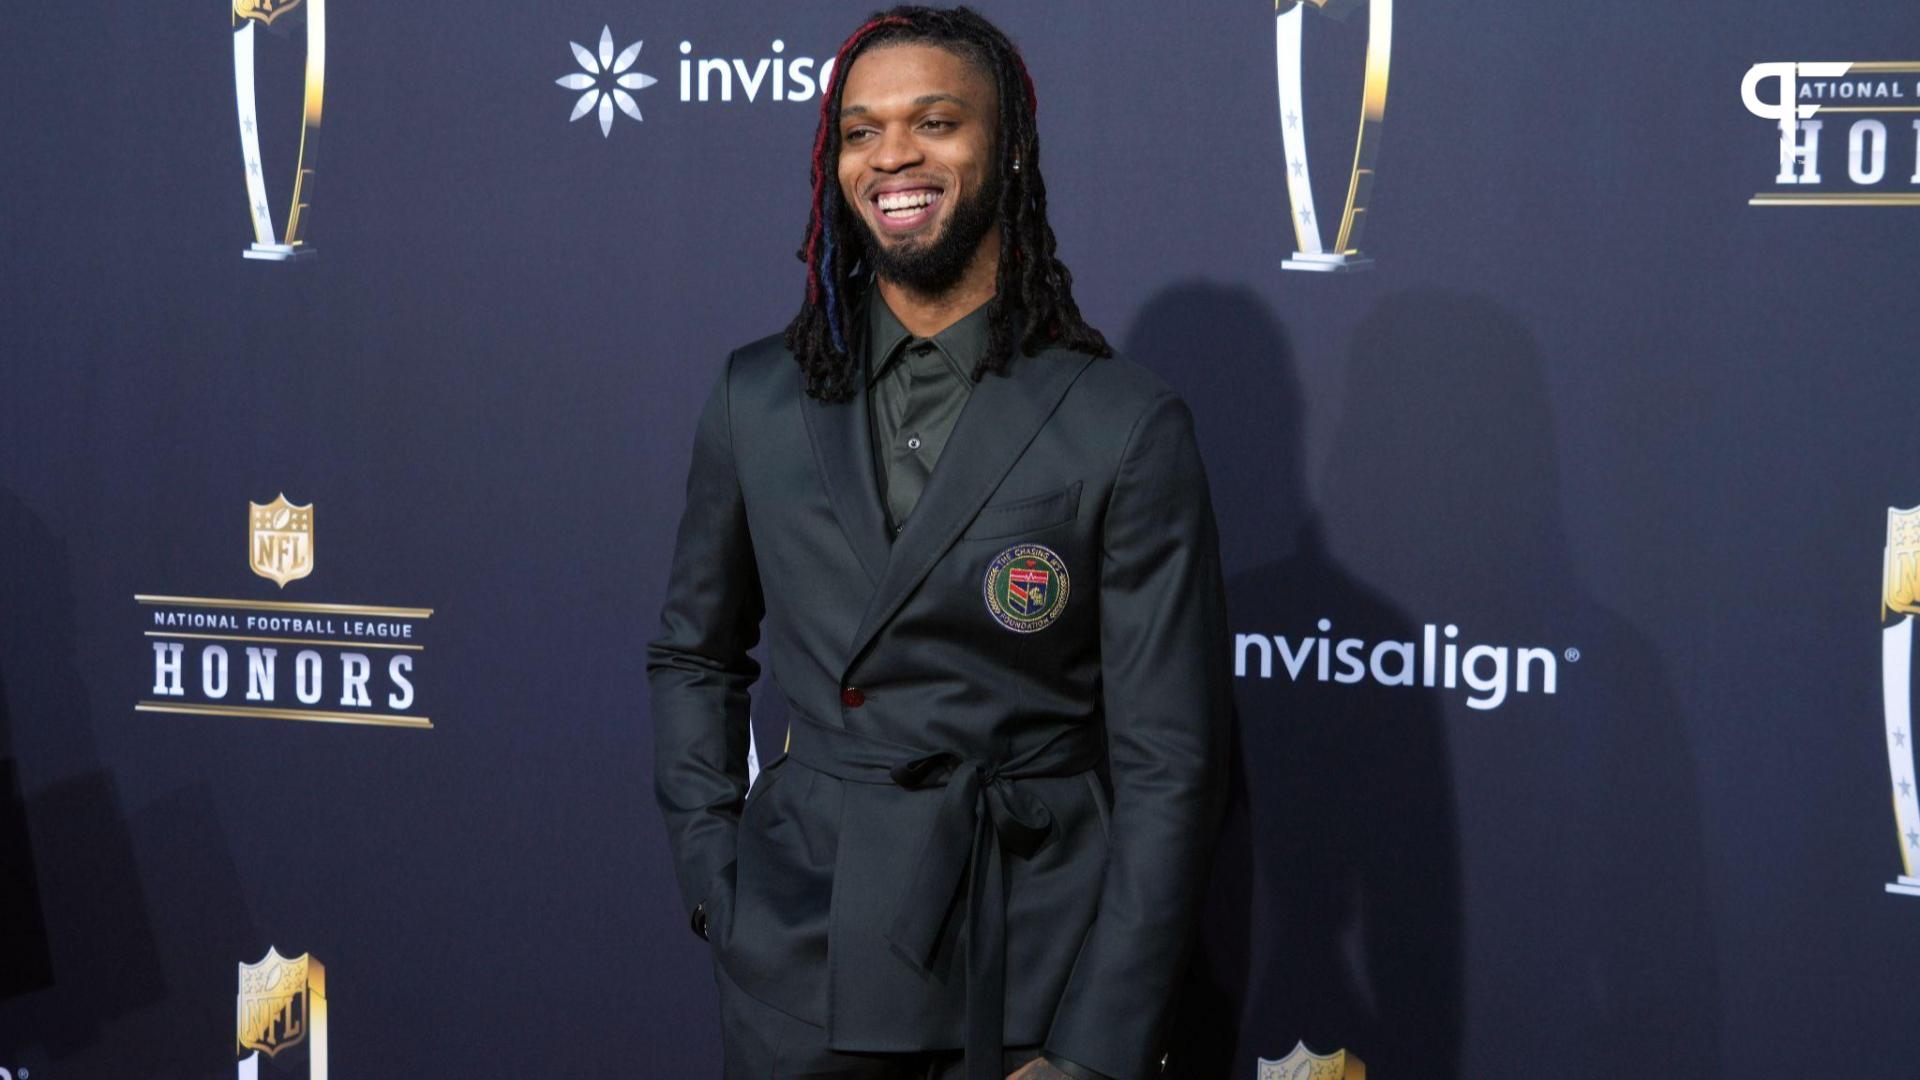 Buffalo Bills safety Damar Hamlin on the red carpet before the NFL Honors show at Resorts World Theatre.